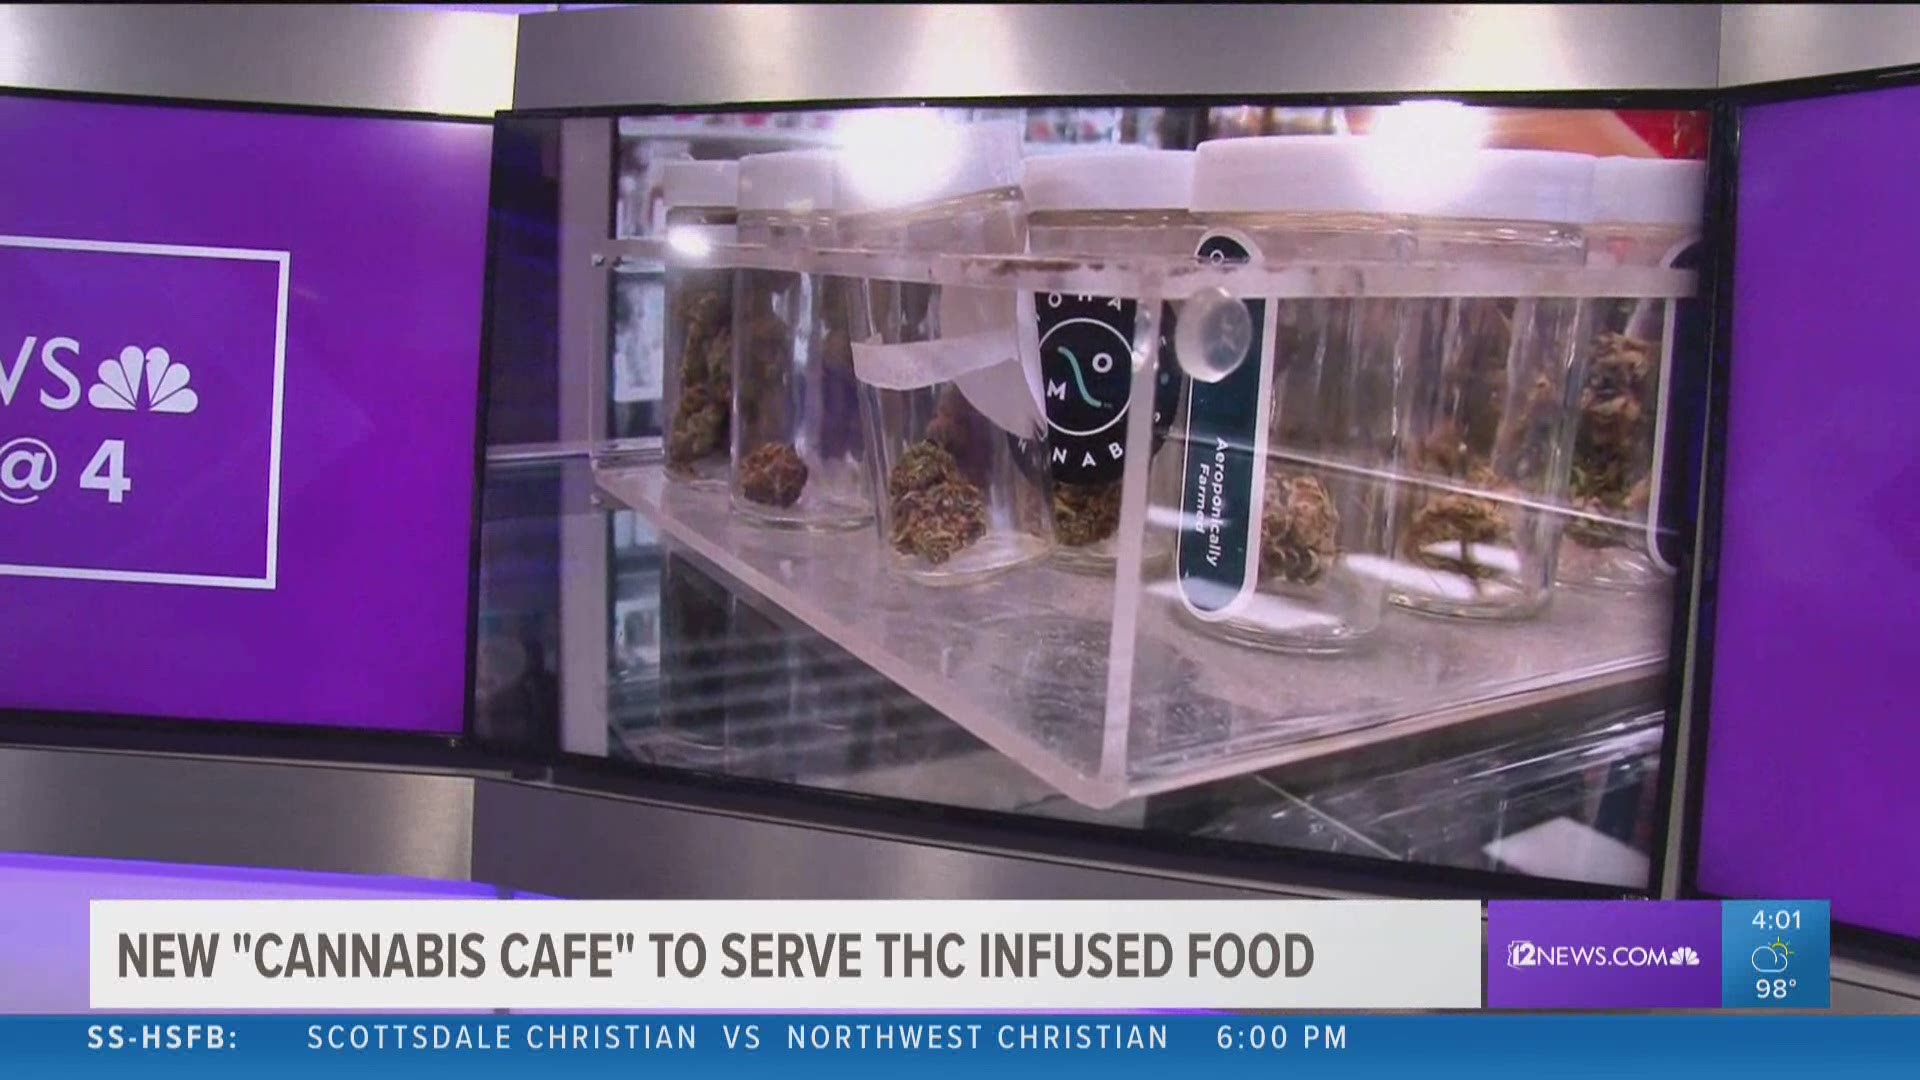 A so-called "cannabis cafe" is opening up in the Valley. We got a look inside the kitchen that is serving up food and baked goods infused with THC.